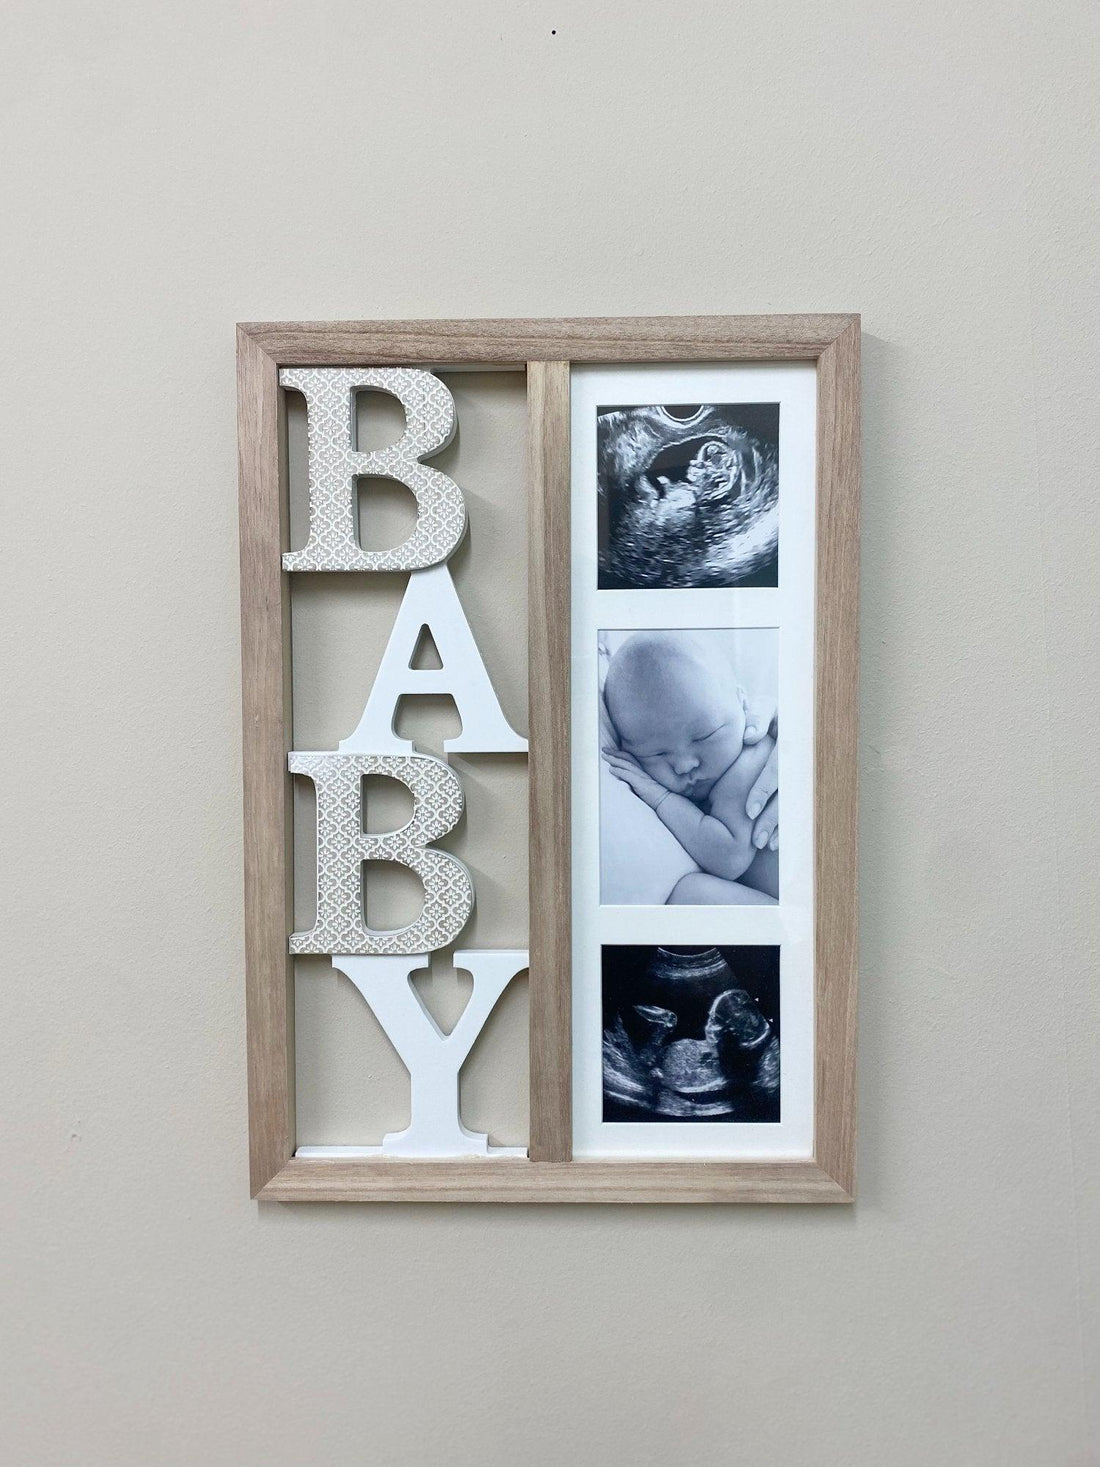 Baby Three Photograph Wooden Frame 43cm - £33.99 - New Baby 